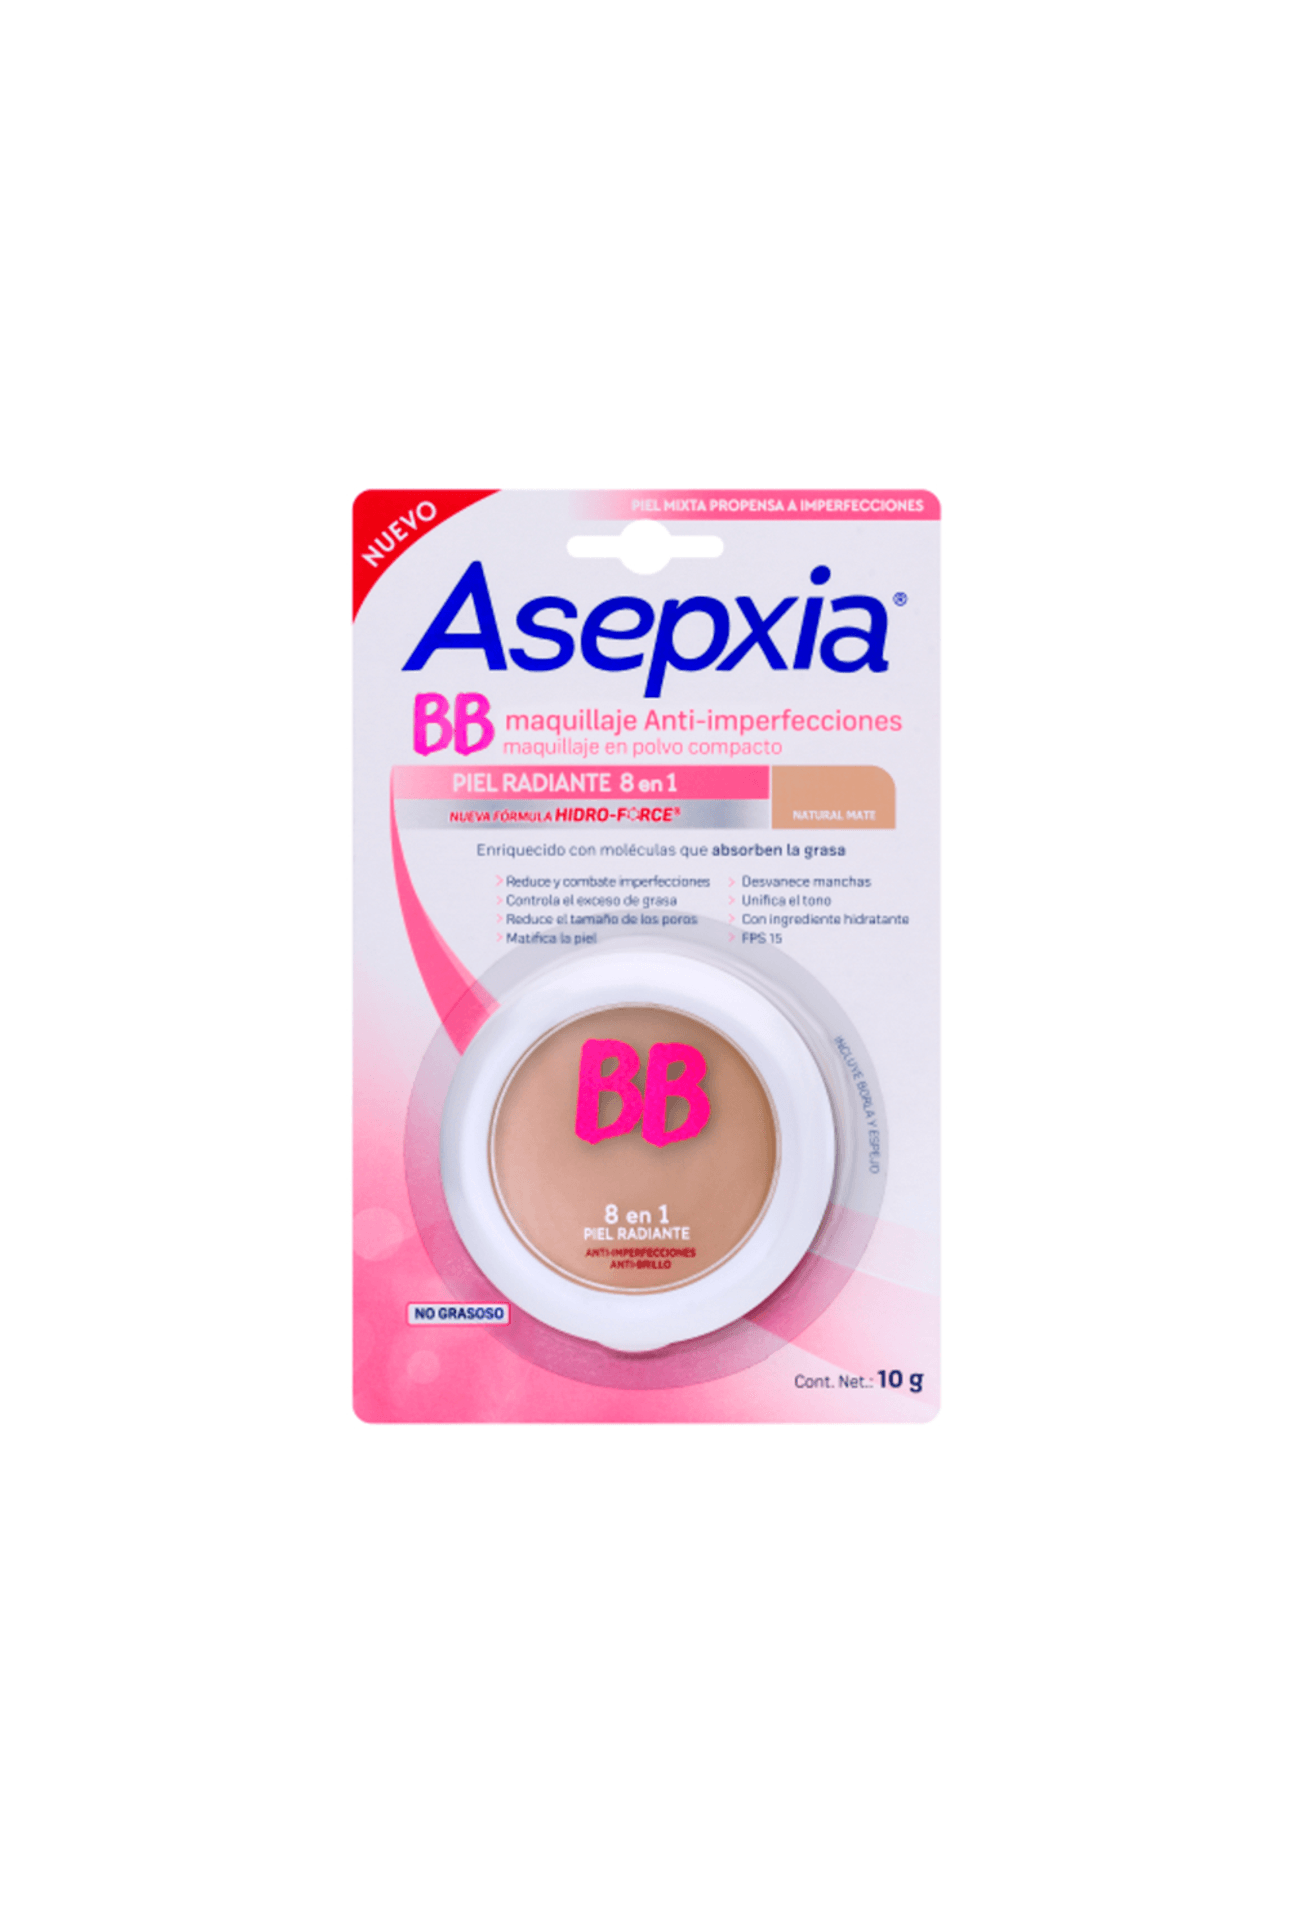 Asepxia-55058_Asepxia-Maquillaje-en-Polvo-Compacto-BB-Hidro-Force-Mate-Natural_img1-0650240032455